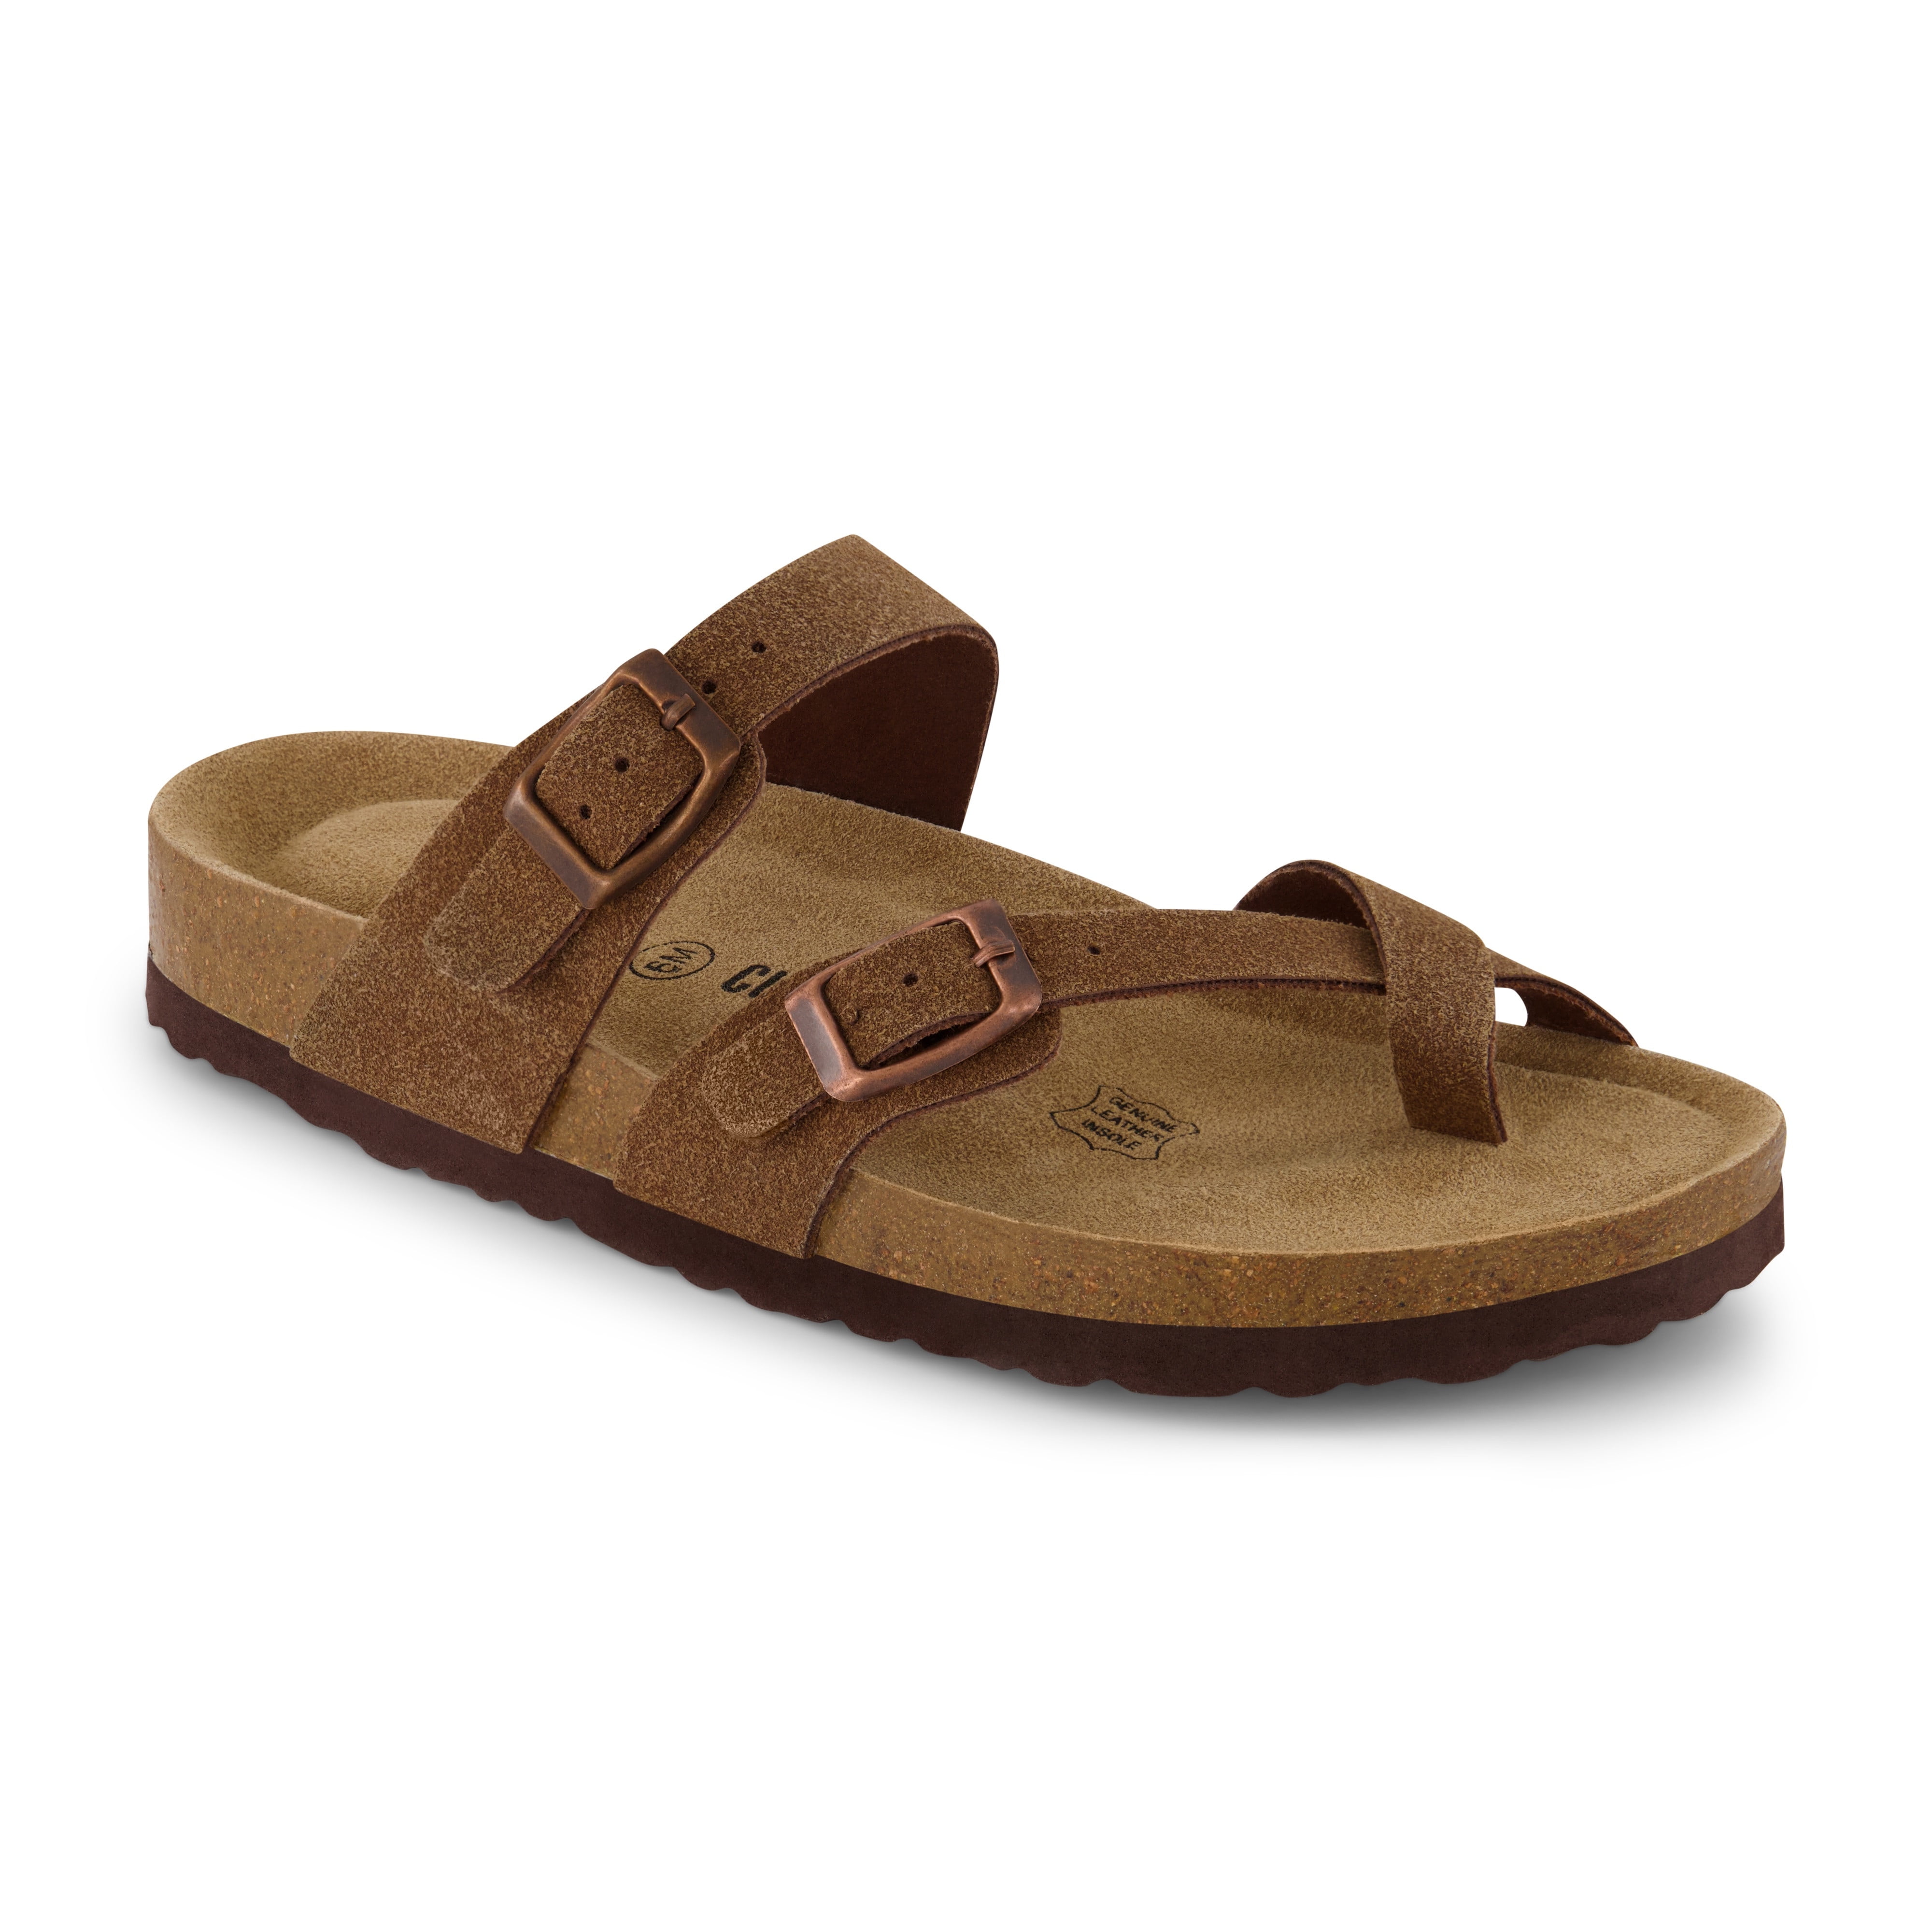 CUSHIONAIRE Women's Luna Cork Footbed Sandal with Comfort 